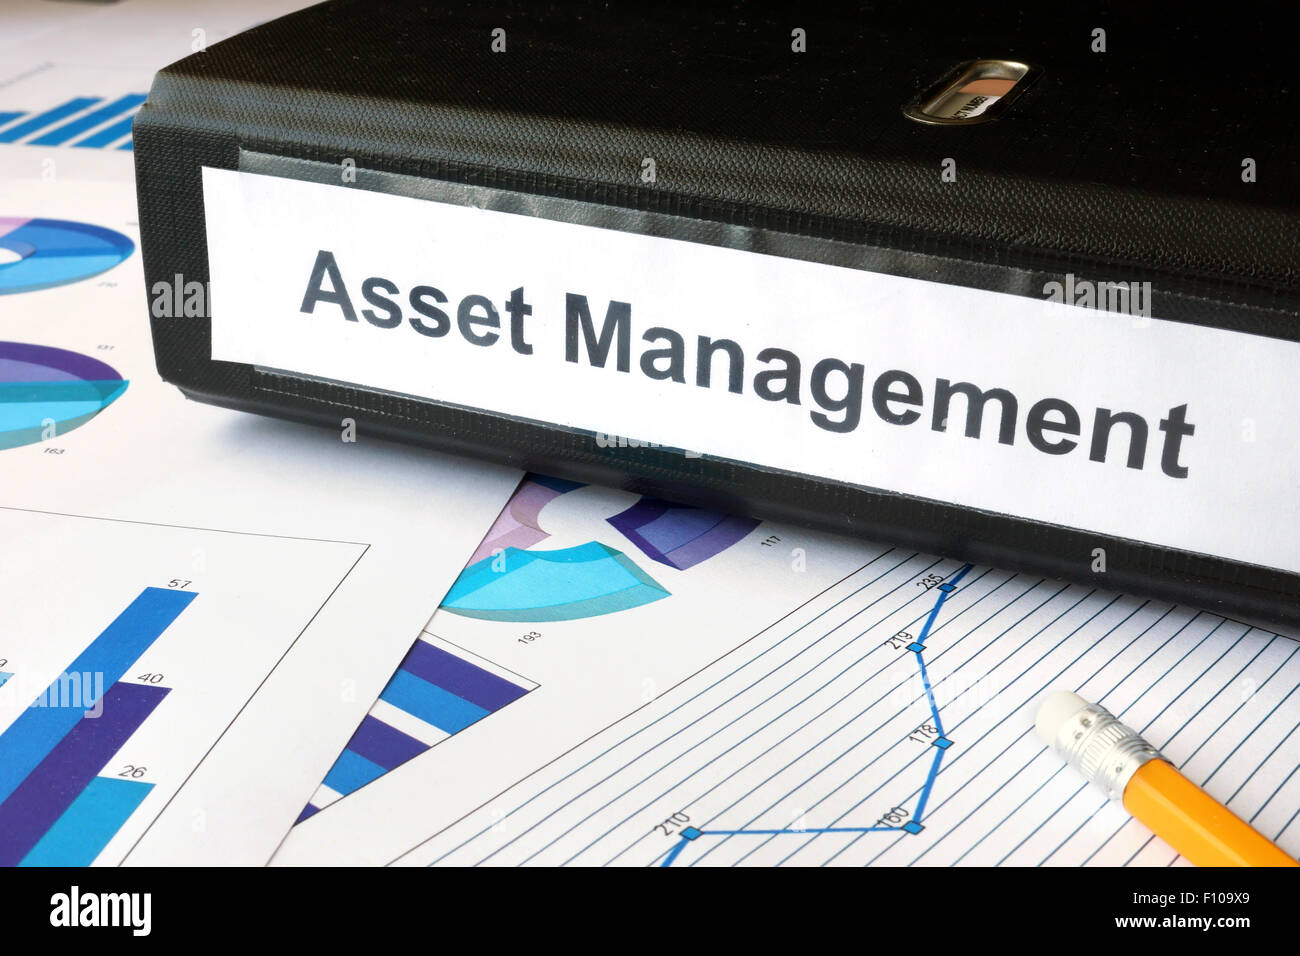 Graphs and file folder with label Asset Management. Business concept. Stock Photo